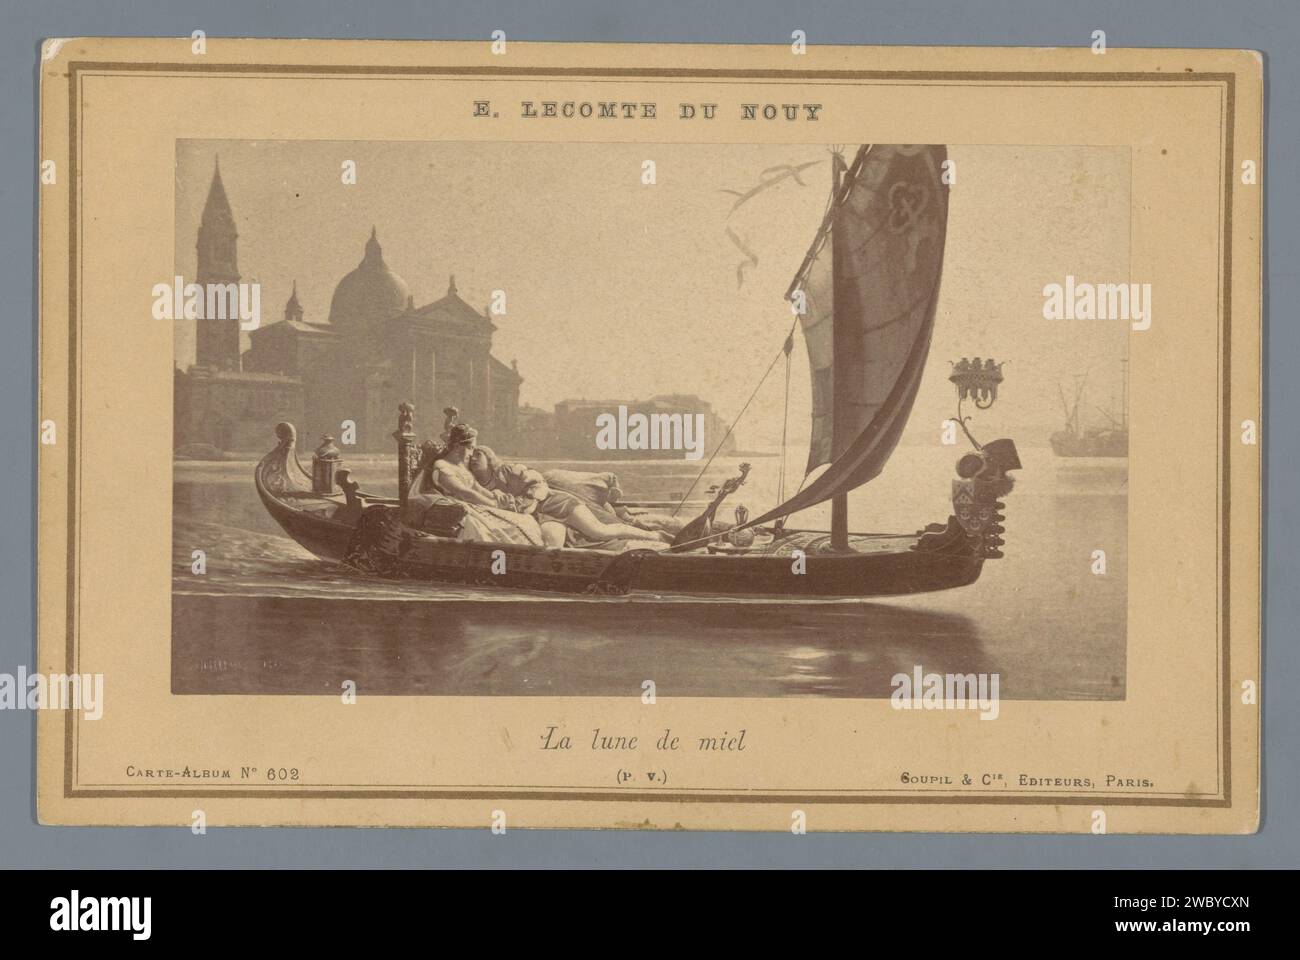 Photo production of a painting of a boat with two lovers in Venice by Jean-Jules-Antoine Lecomte du Nouÿ, Goupil & Cie., After Jean-Jules-Antoine Lecomte du Nouÿ, c. 1880 - c. 1910 cabinet photograph  Paris cardboard. photographic support albumen print wedding trip, honeymoon. rowing-boat, canoe, etc. Venice Stock Photo